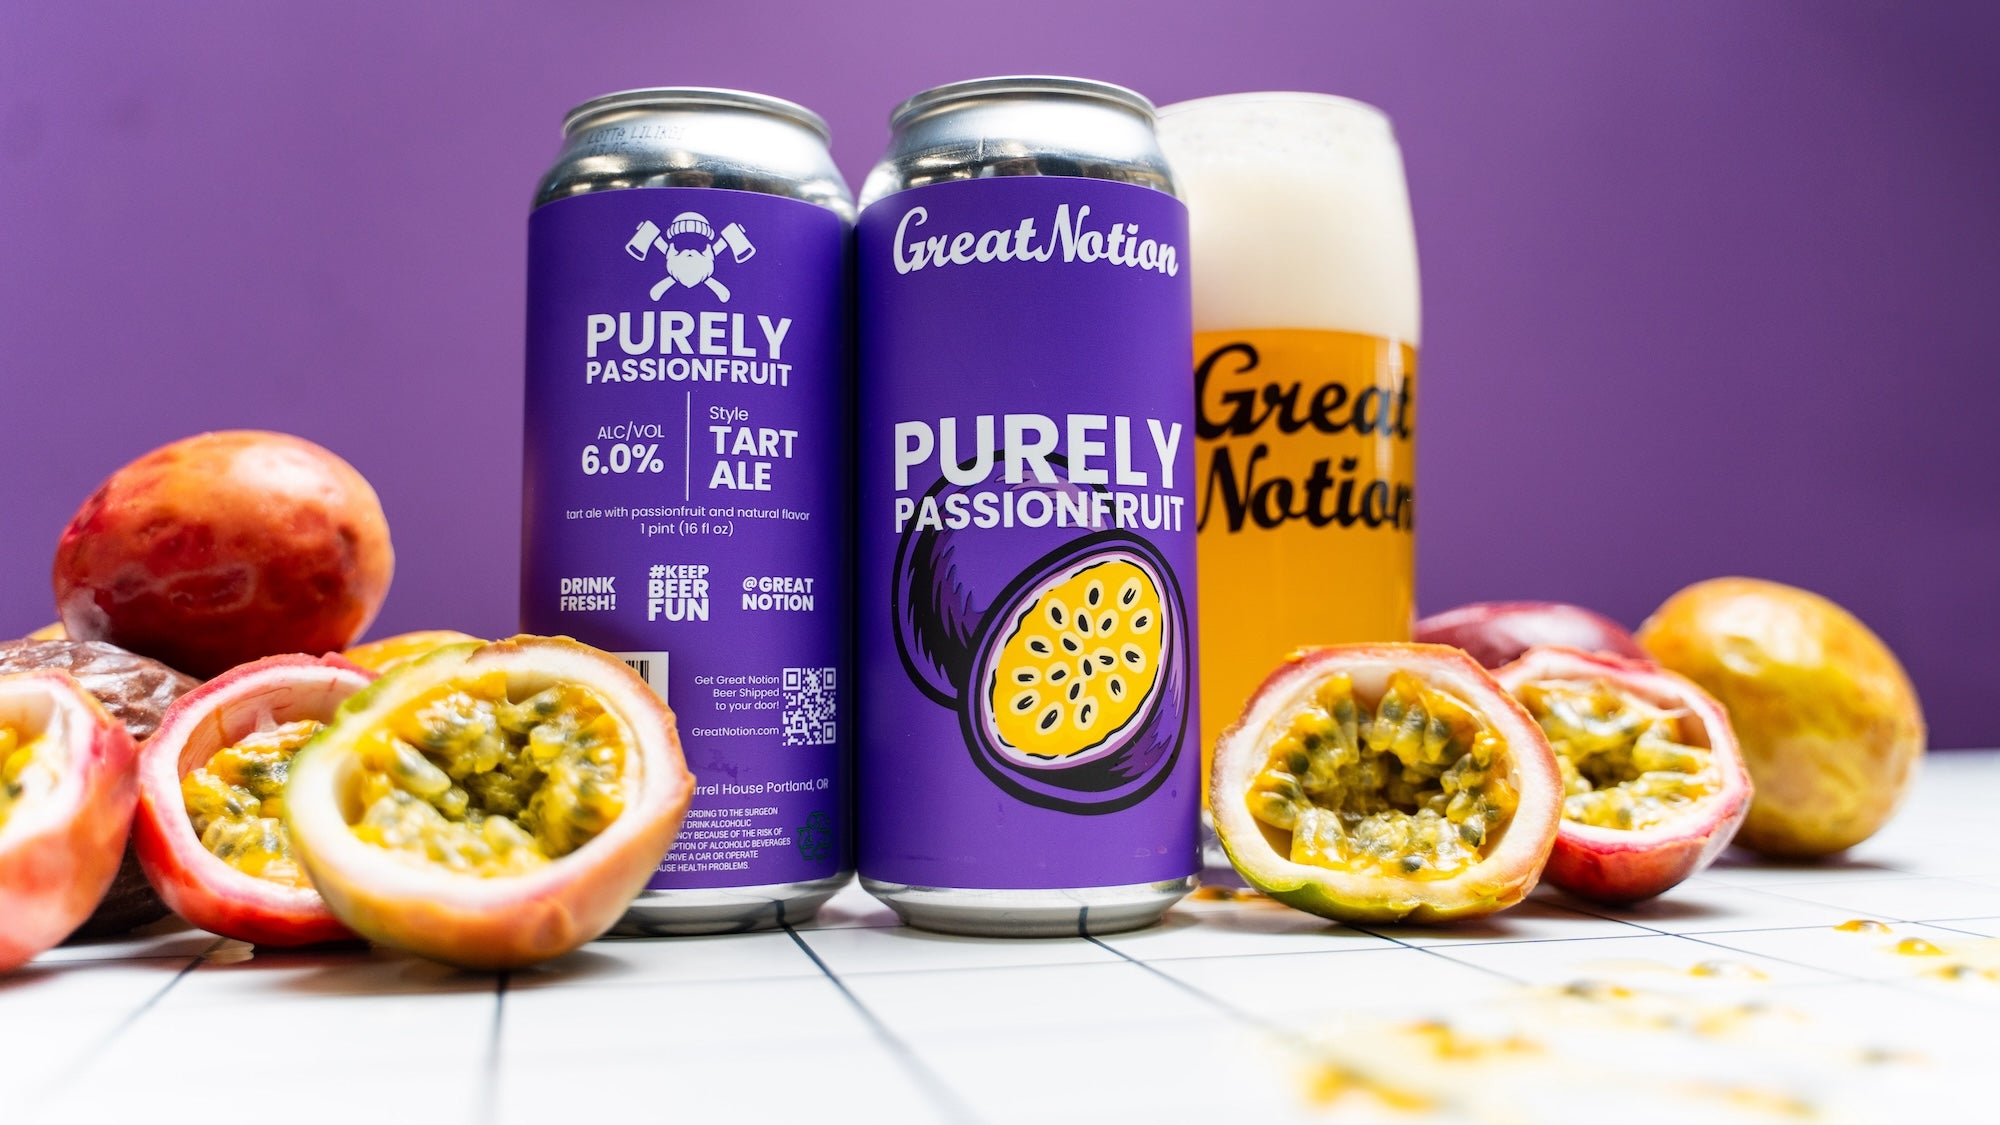 Purely Passionfruit